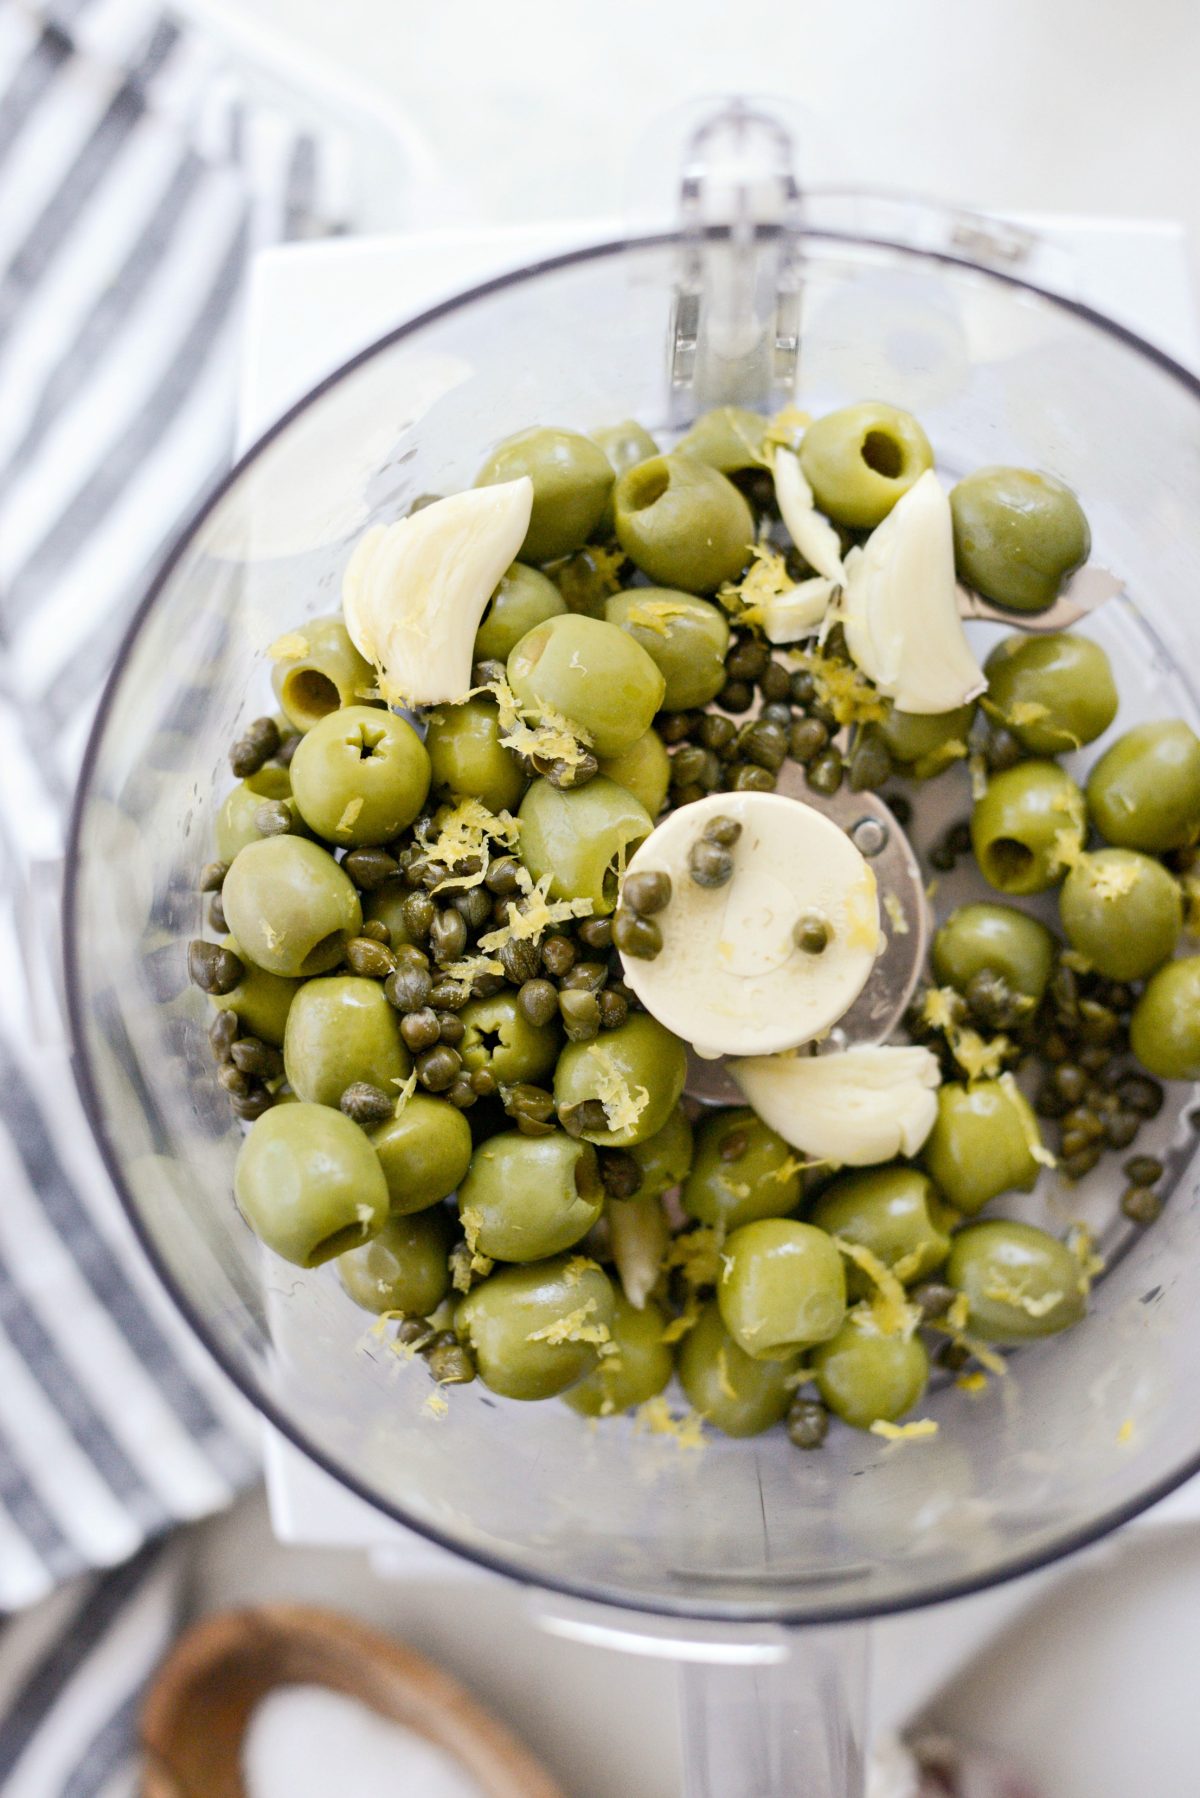 olives, capers, garlic and lemon zest in food processor